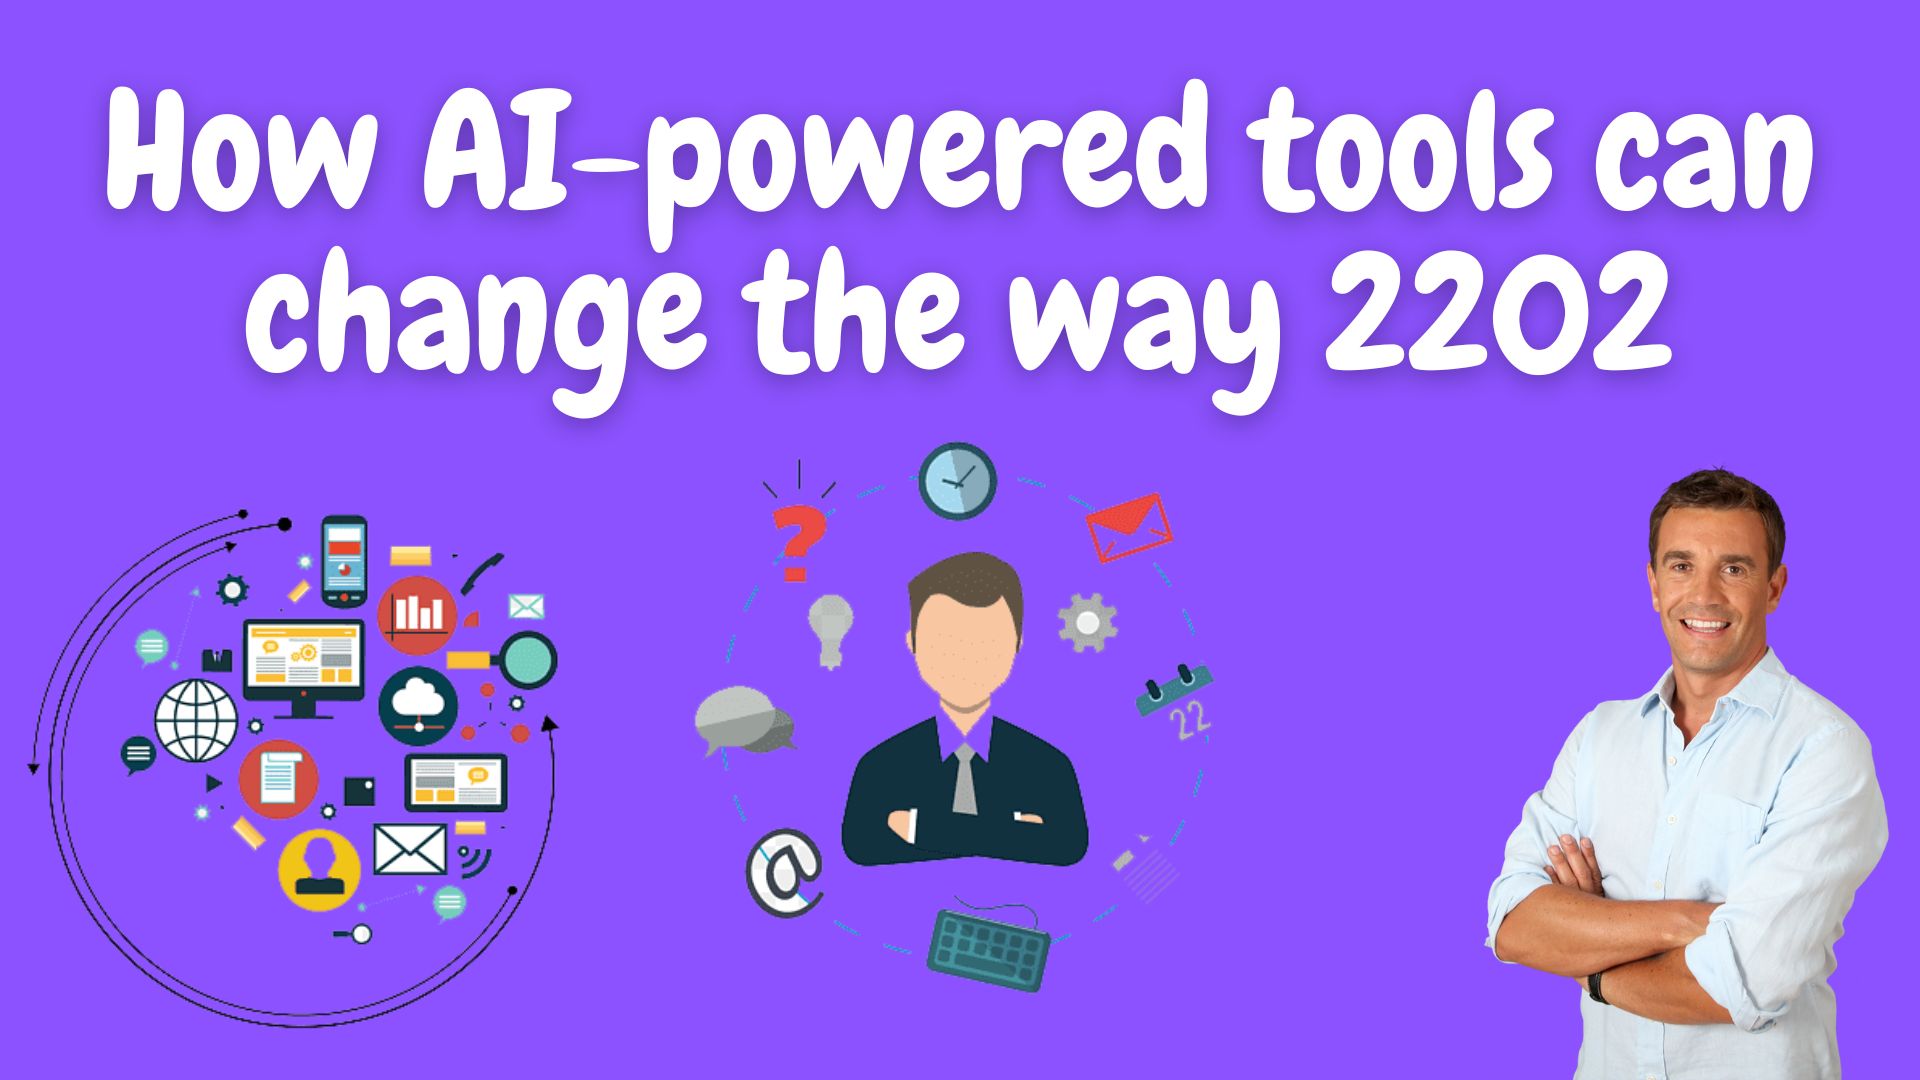 How ai-powered tools can change the way 2202